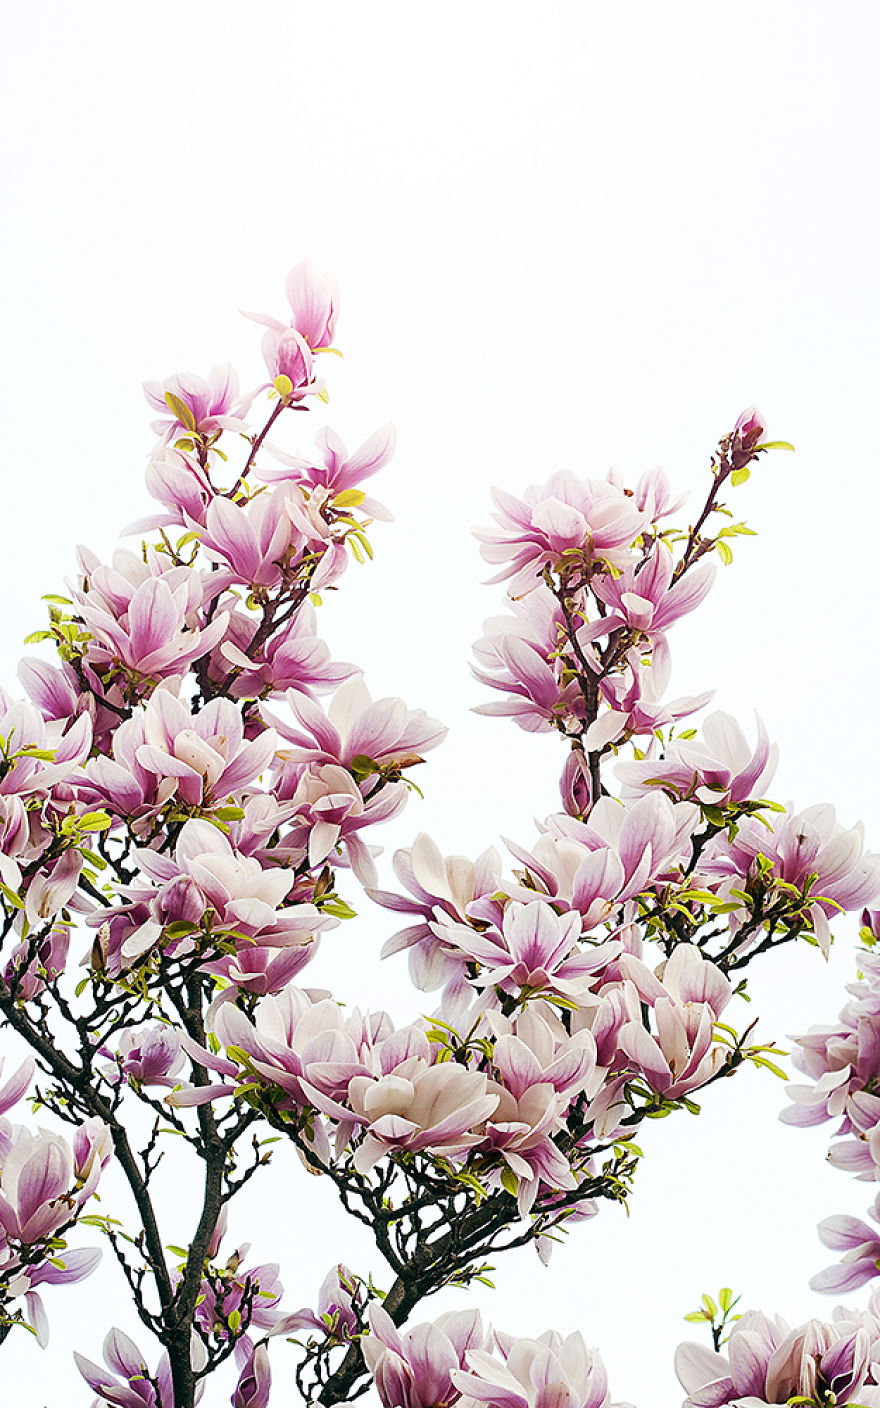 I Photographed My Favorite Spring Tree, The Magnolia, At Its Best